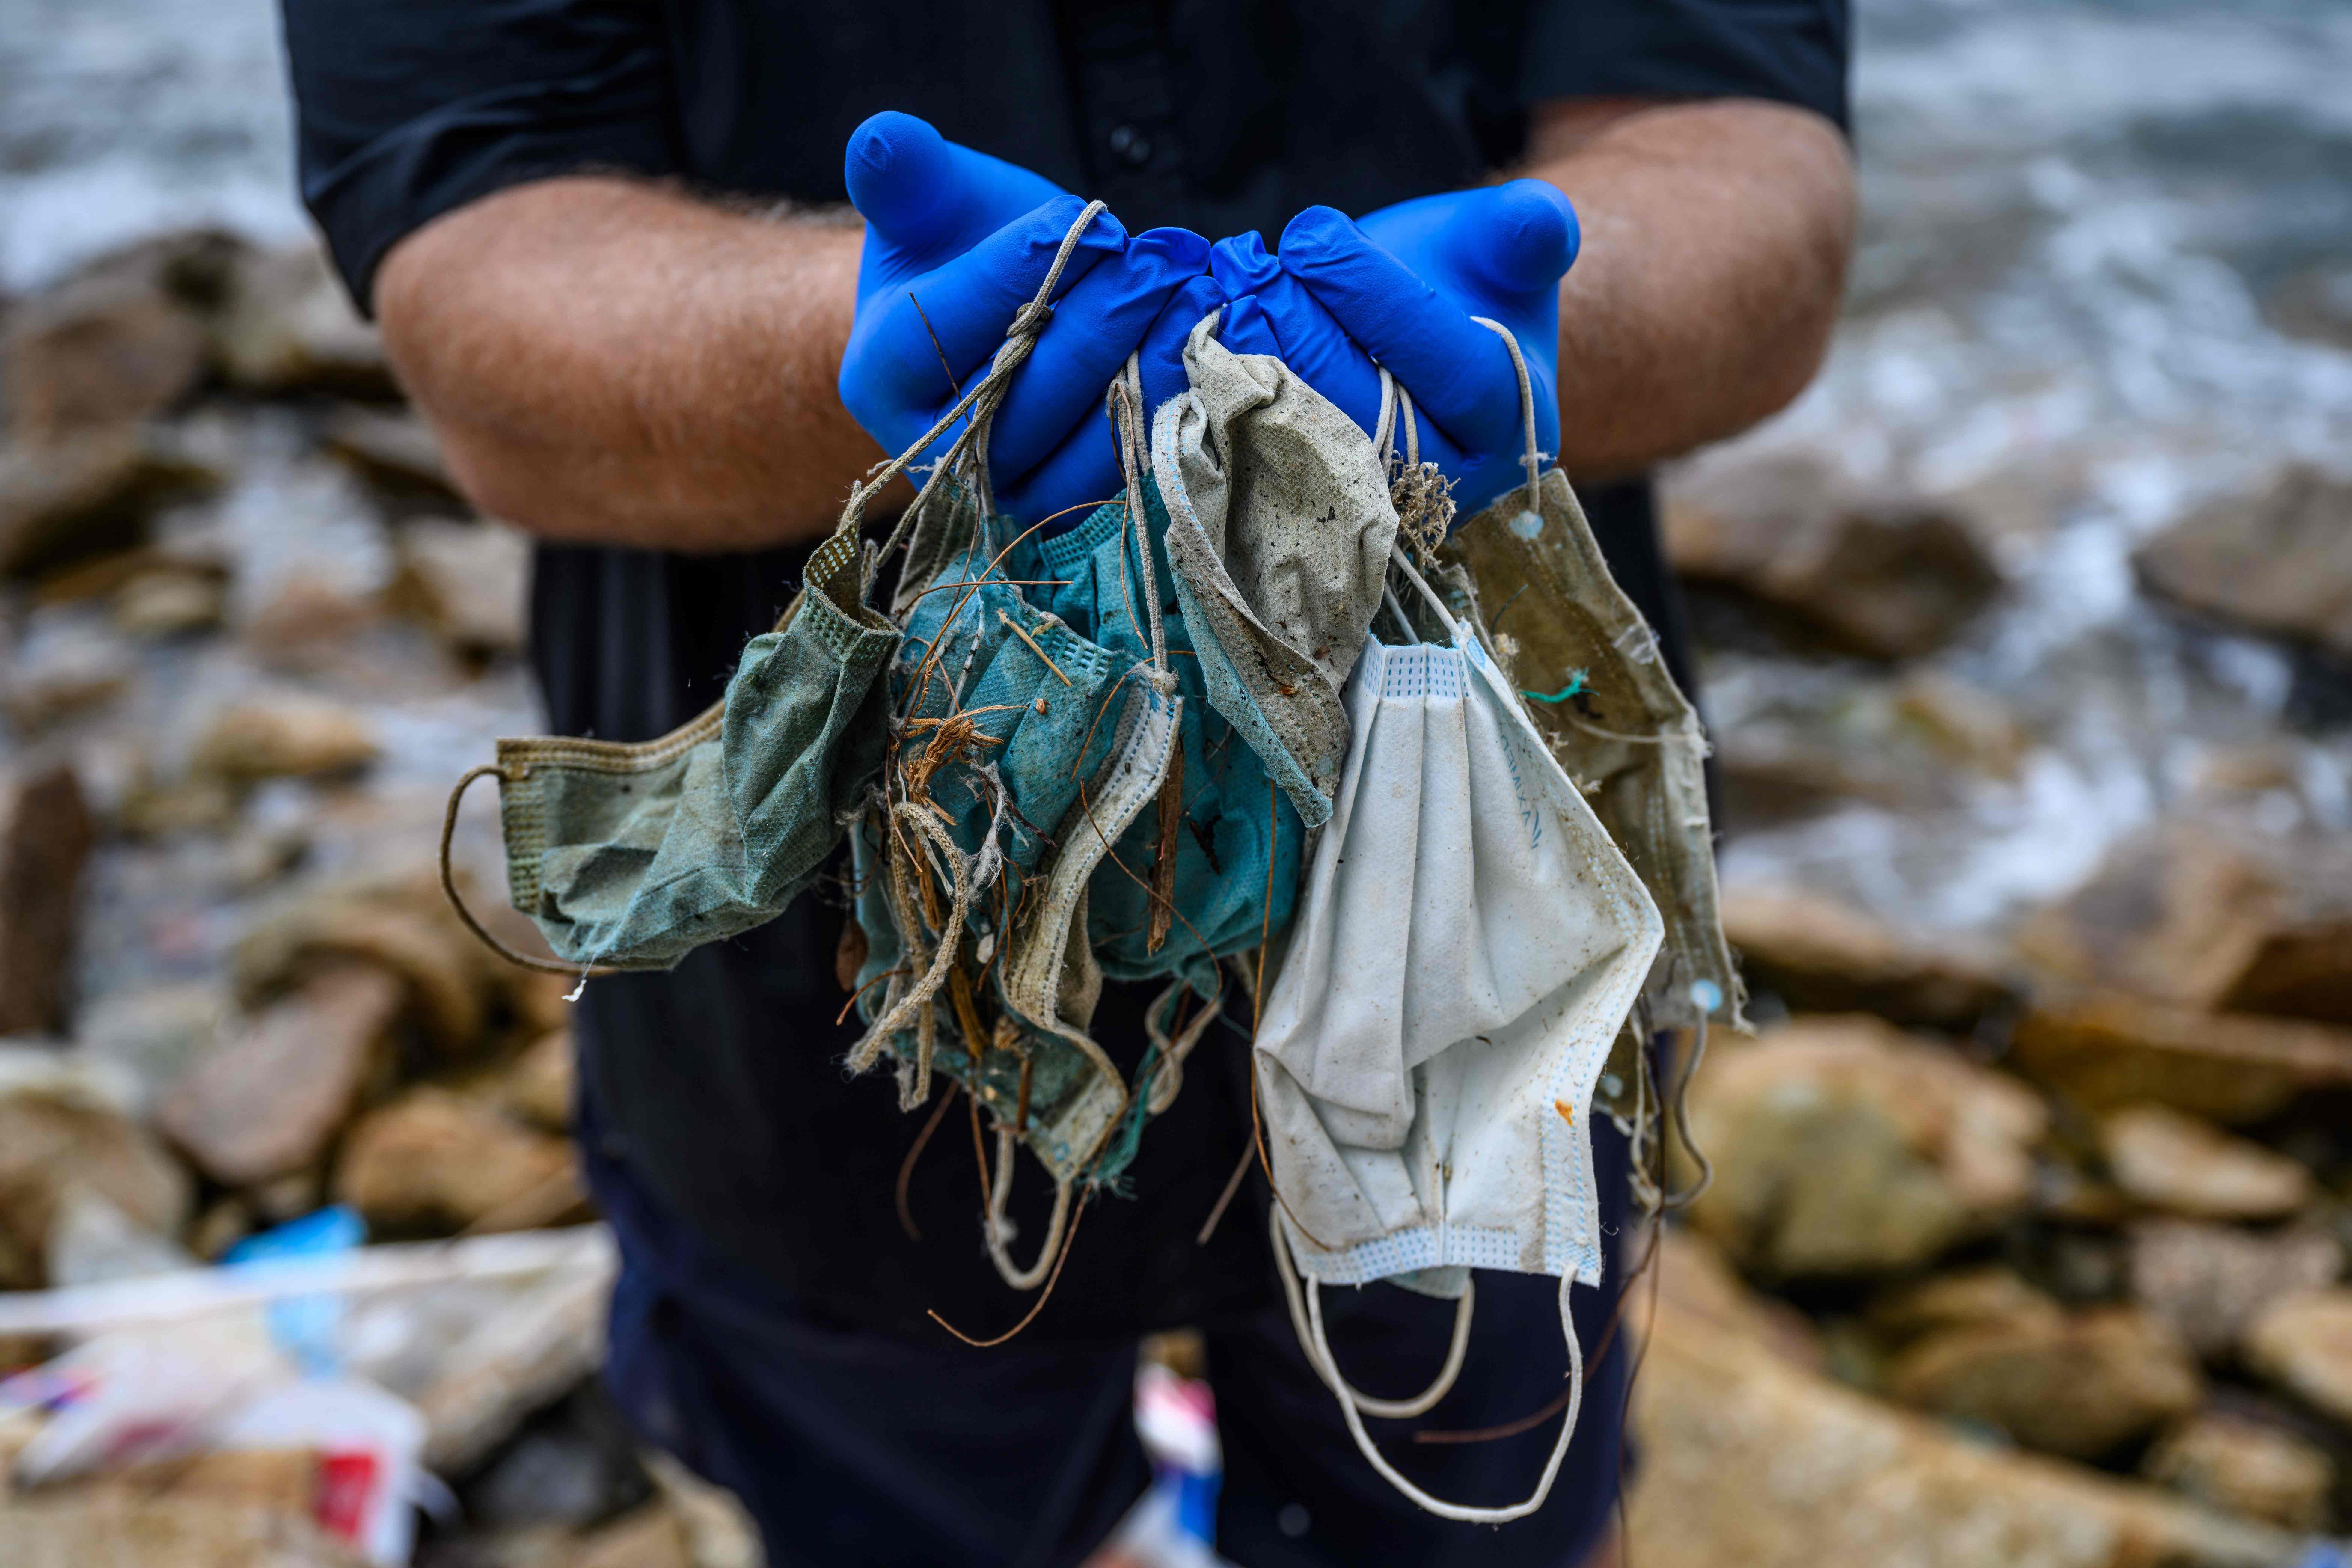 Surgical masks are washing up in growing quantities on the shores of Hong Kong. Credit: AFP Photo